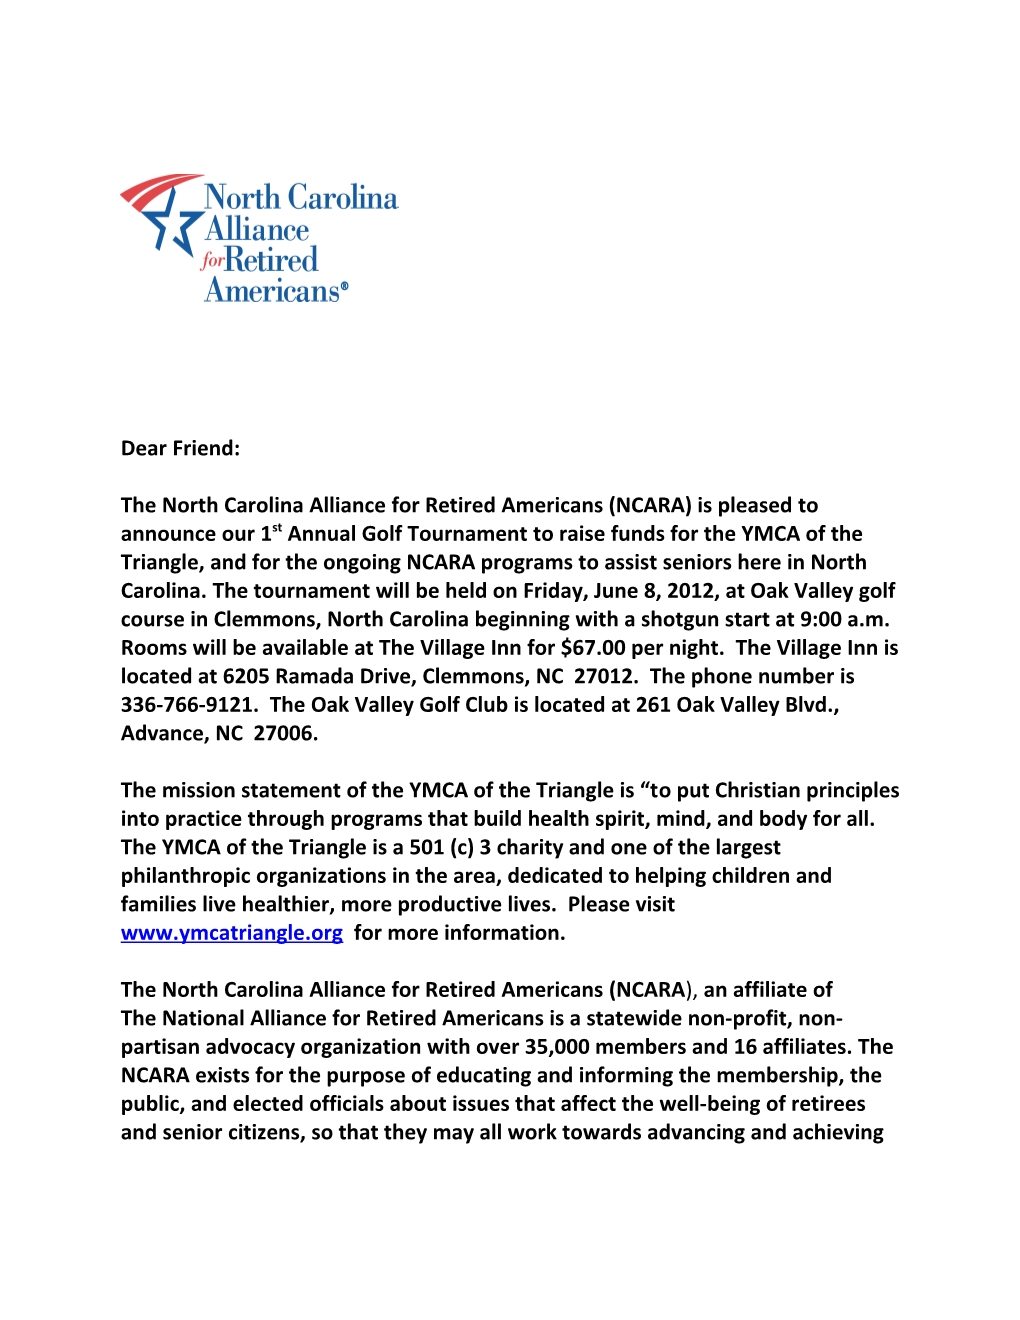 The North Carolina Alliance for Retired Americans (NCARA), an Affiliate Of